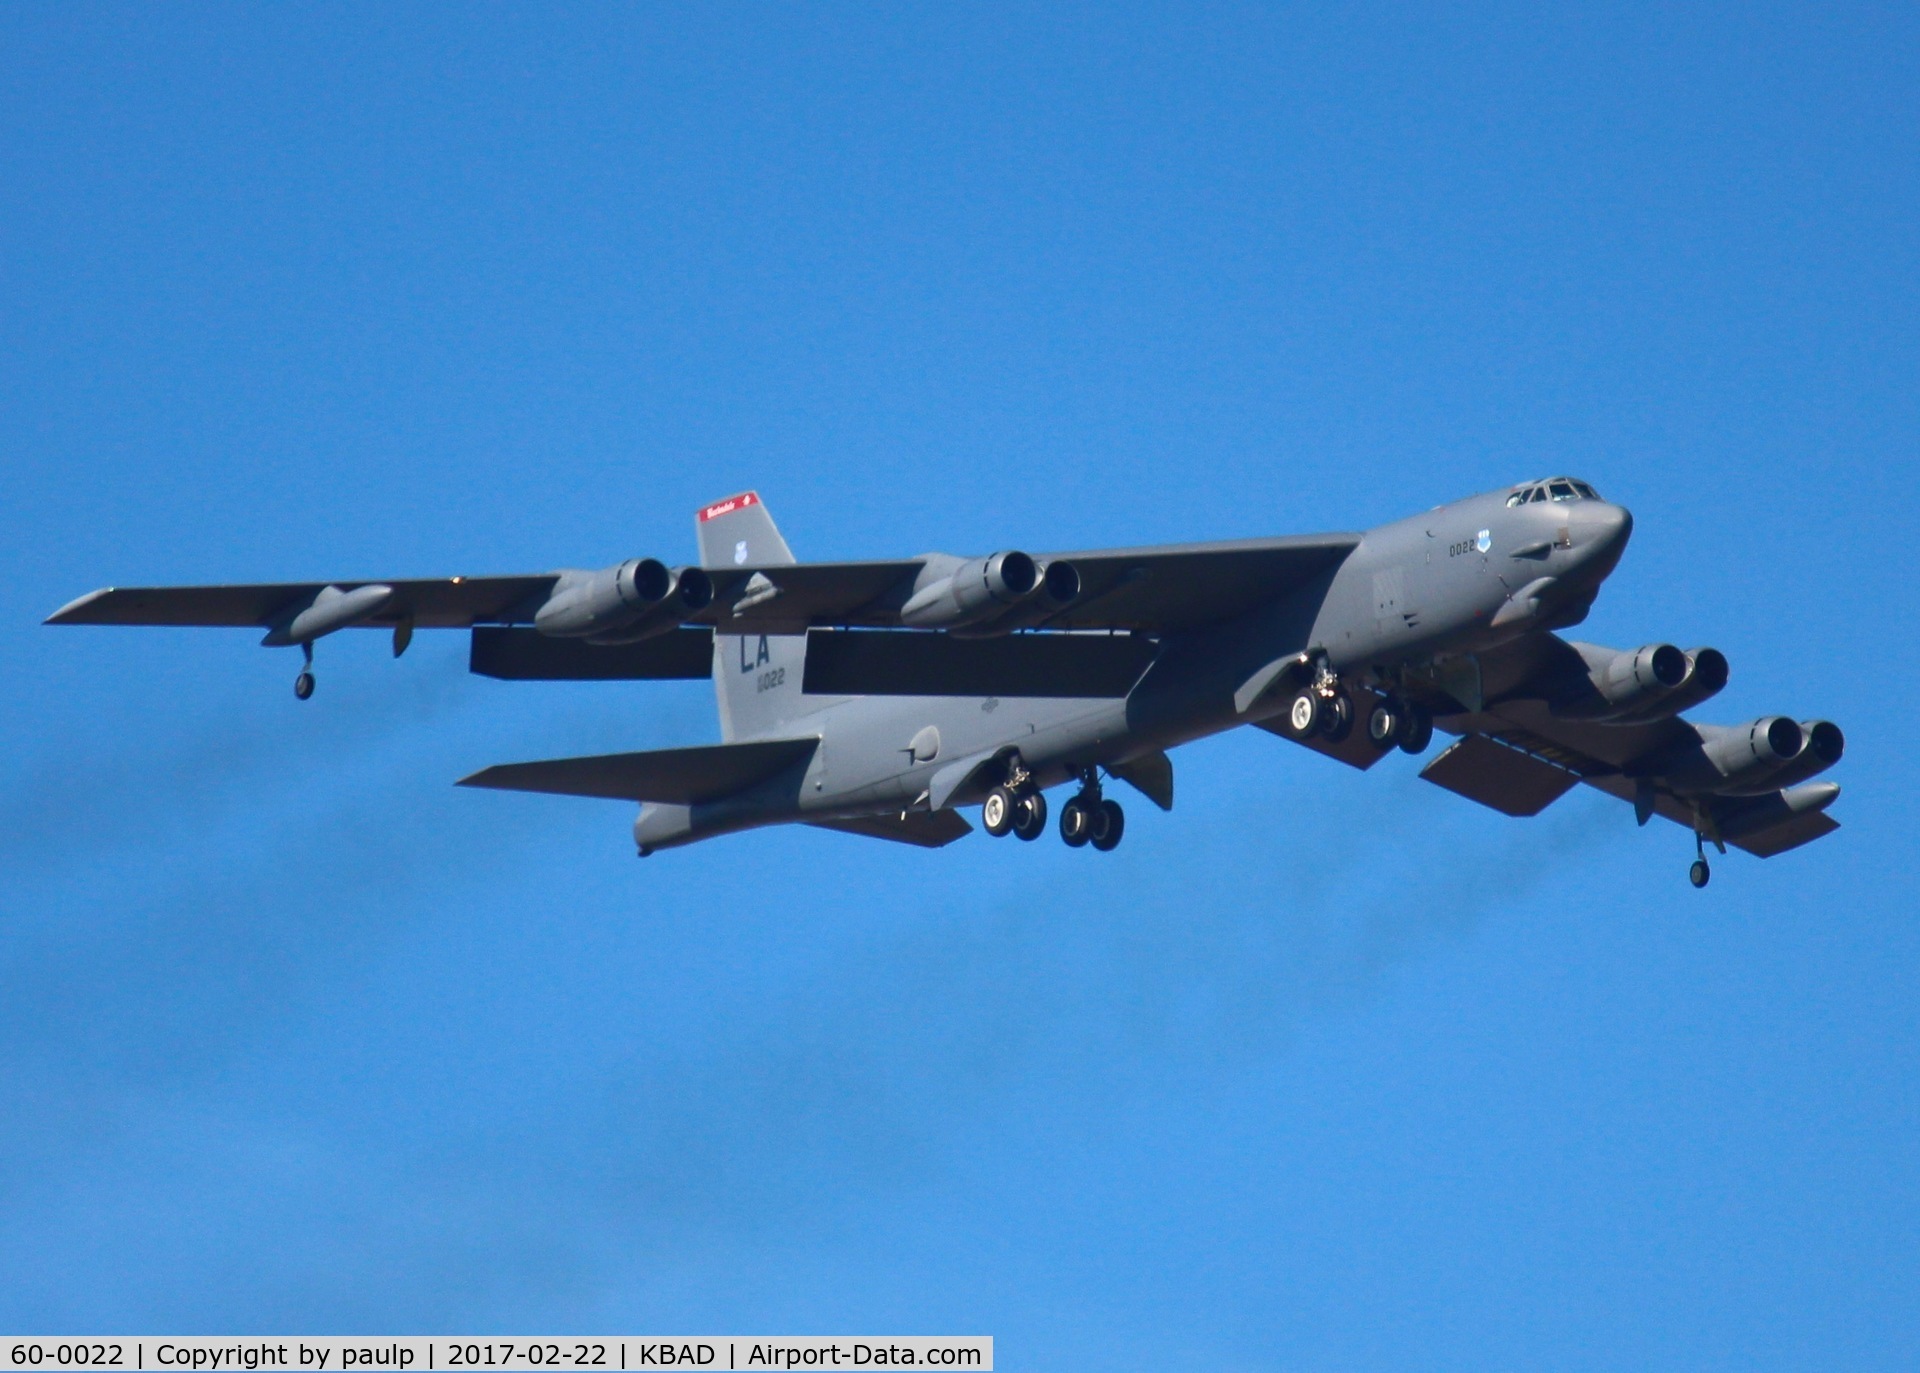 60-0022, 1960 Boeing B-52H Stratofortress C/N 464387, At Barksdale Air Force Base.